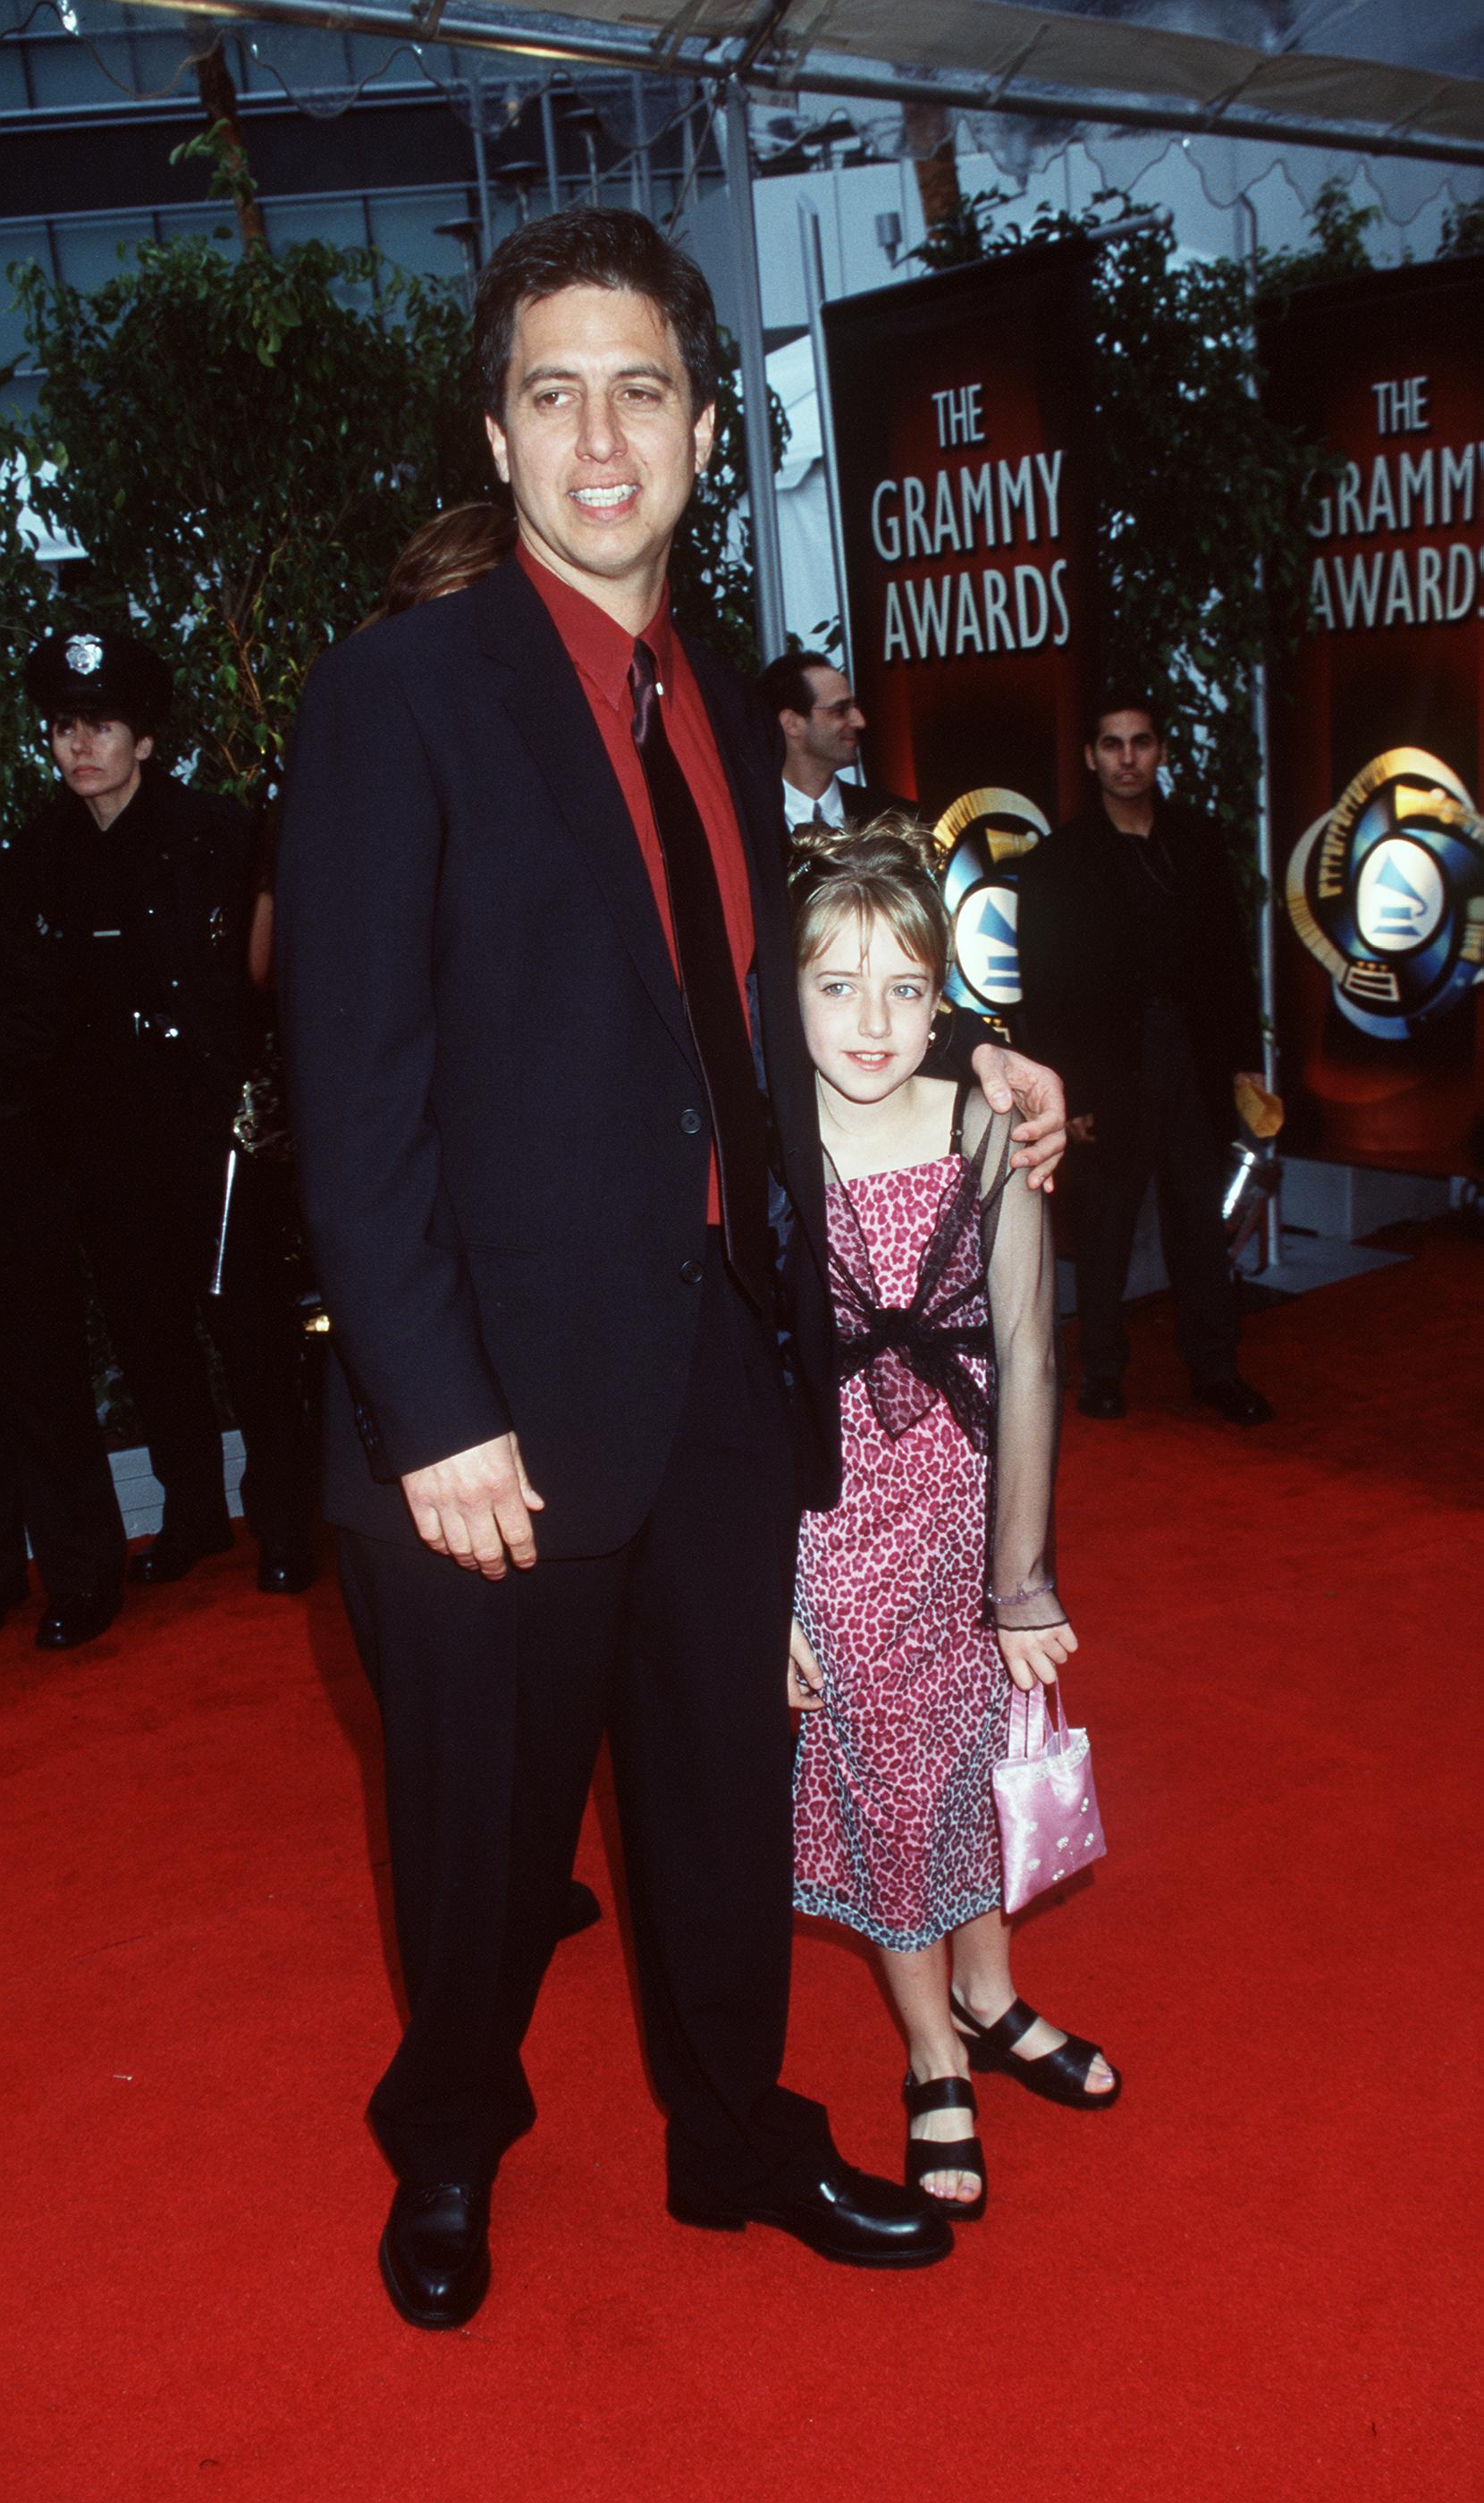 Ray Romano with his daughter, Alexandra, at the 42nd Annual Grammy Awards on February 23, 2000, in Los Angeles, California | Source: Getty Images